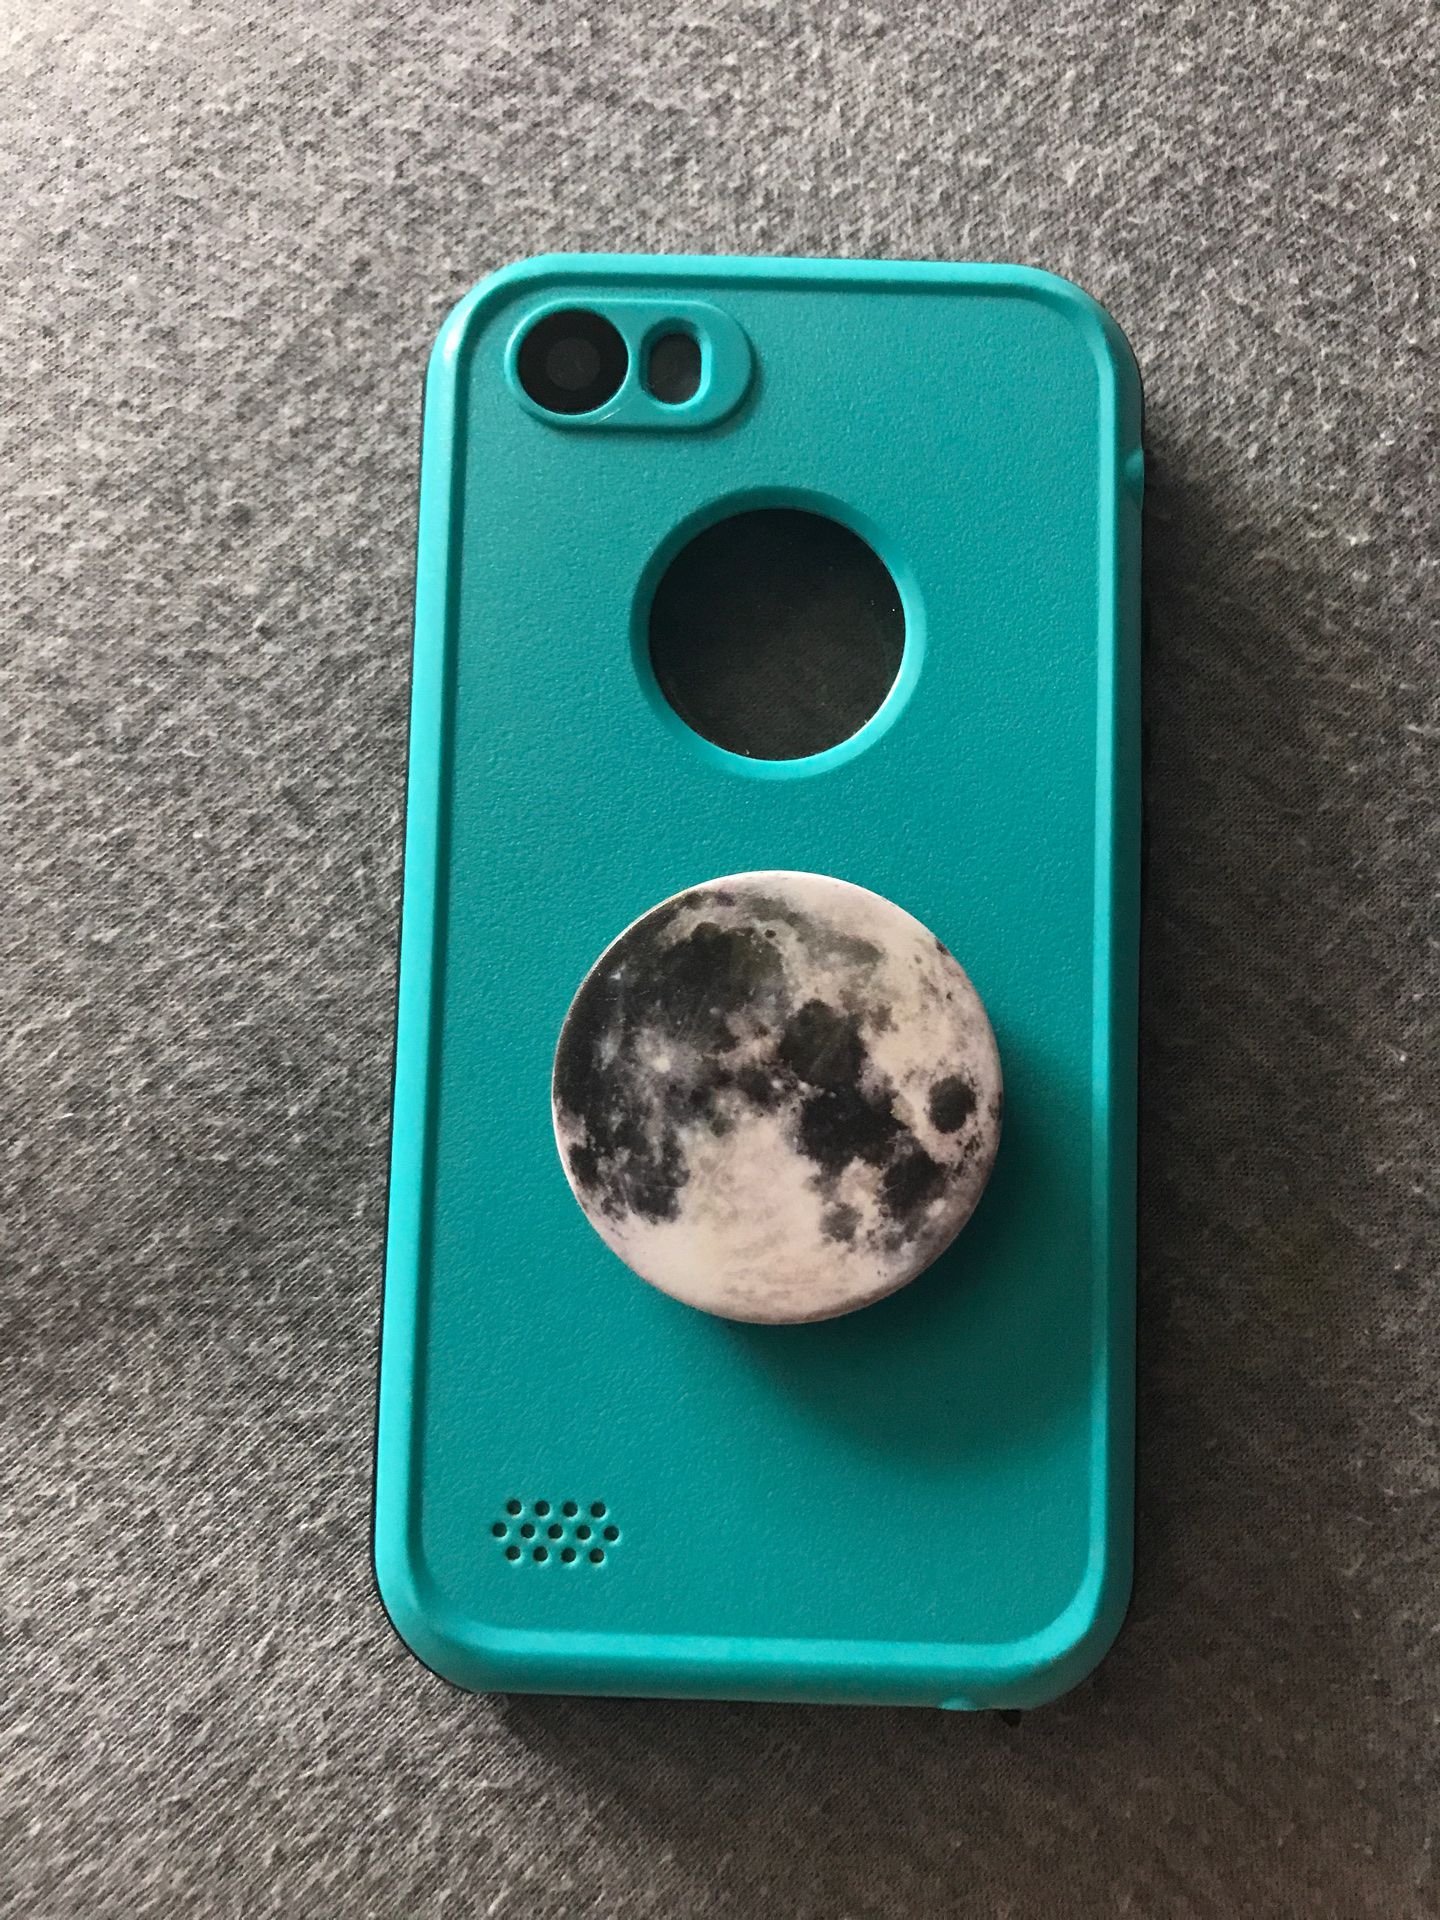 Life Proof Phone Case With POP Socket iPhone 5/s